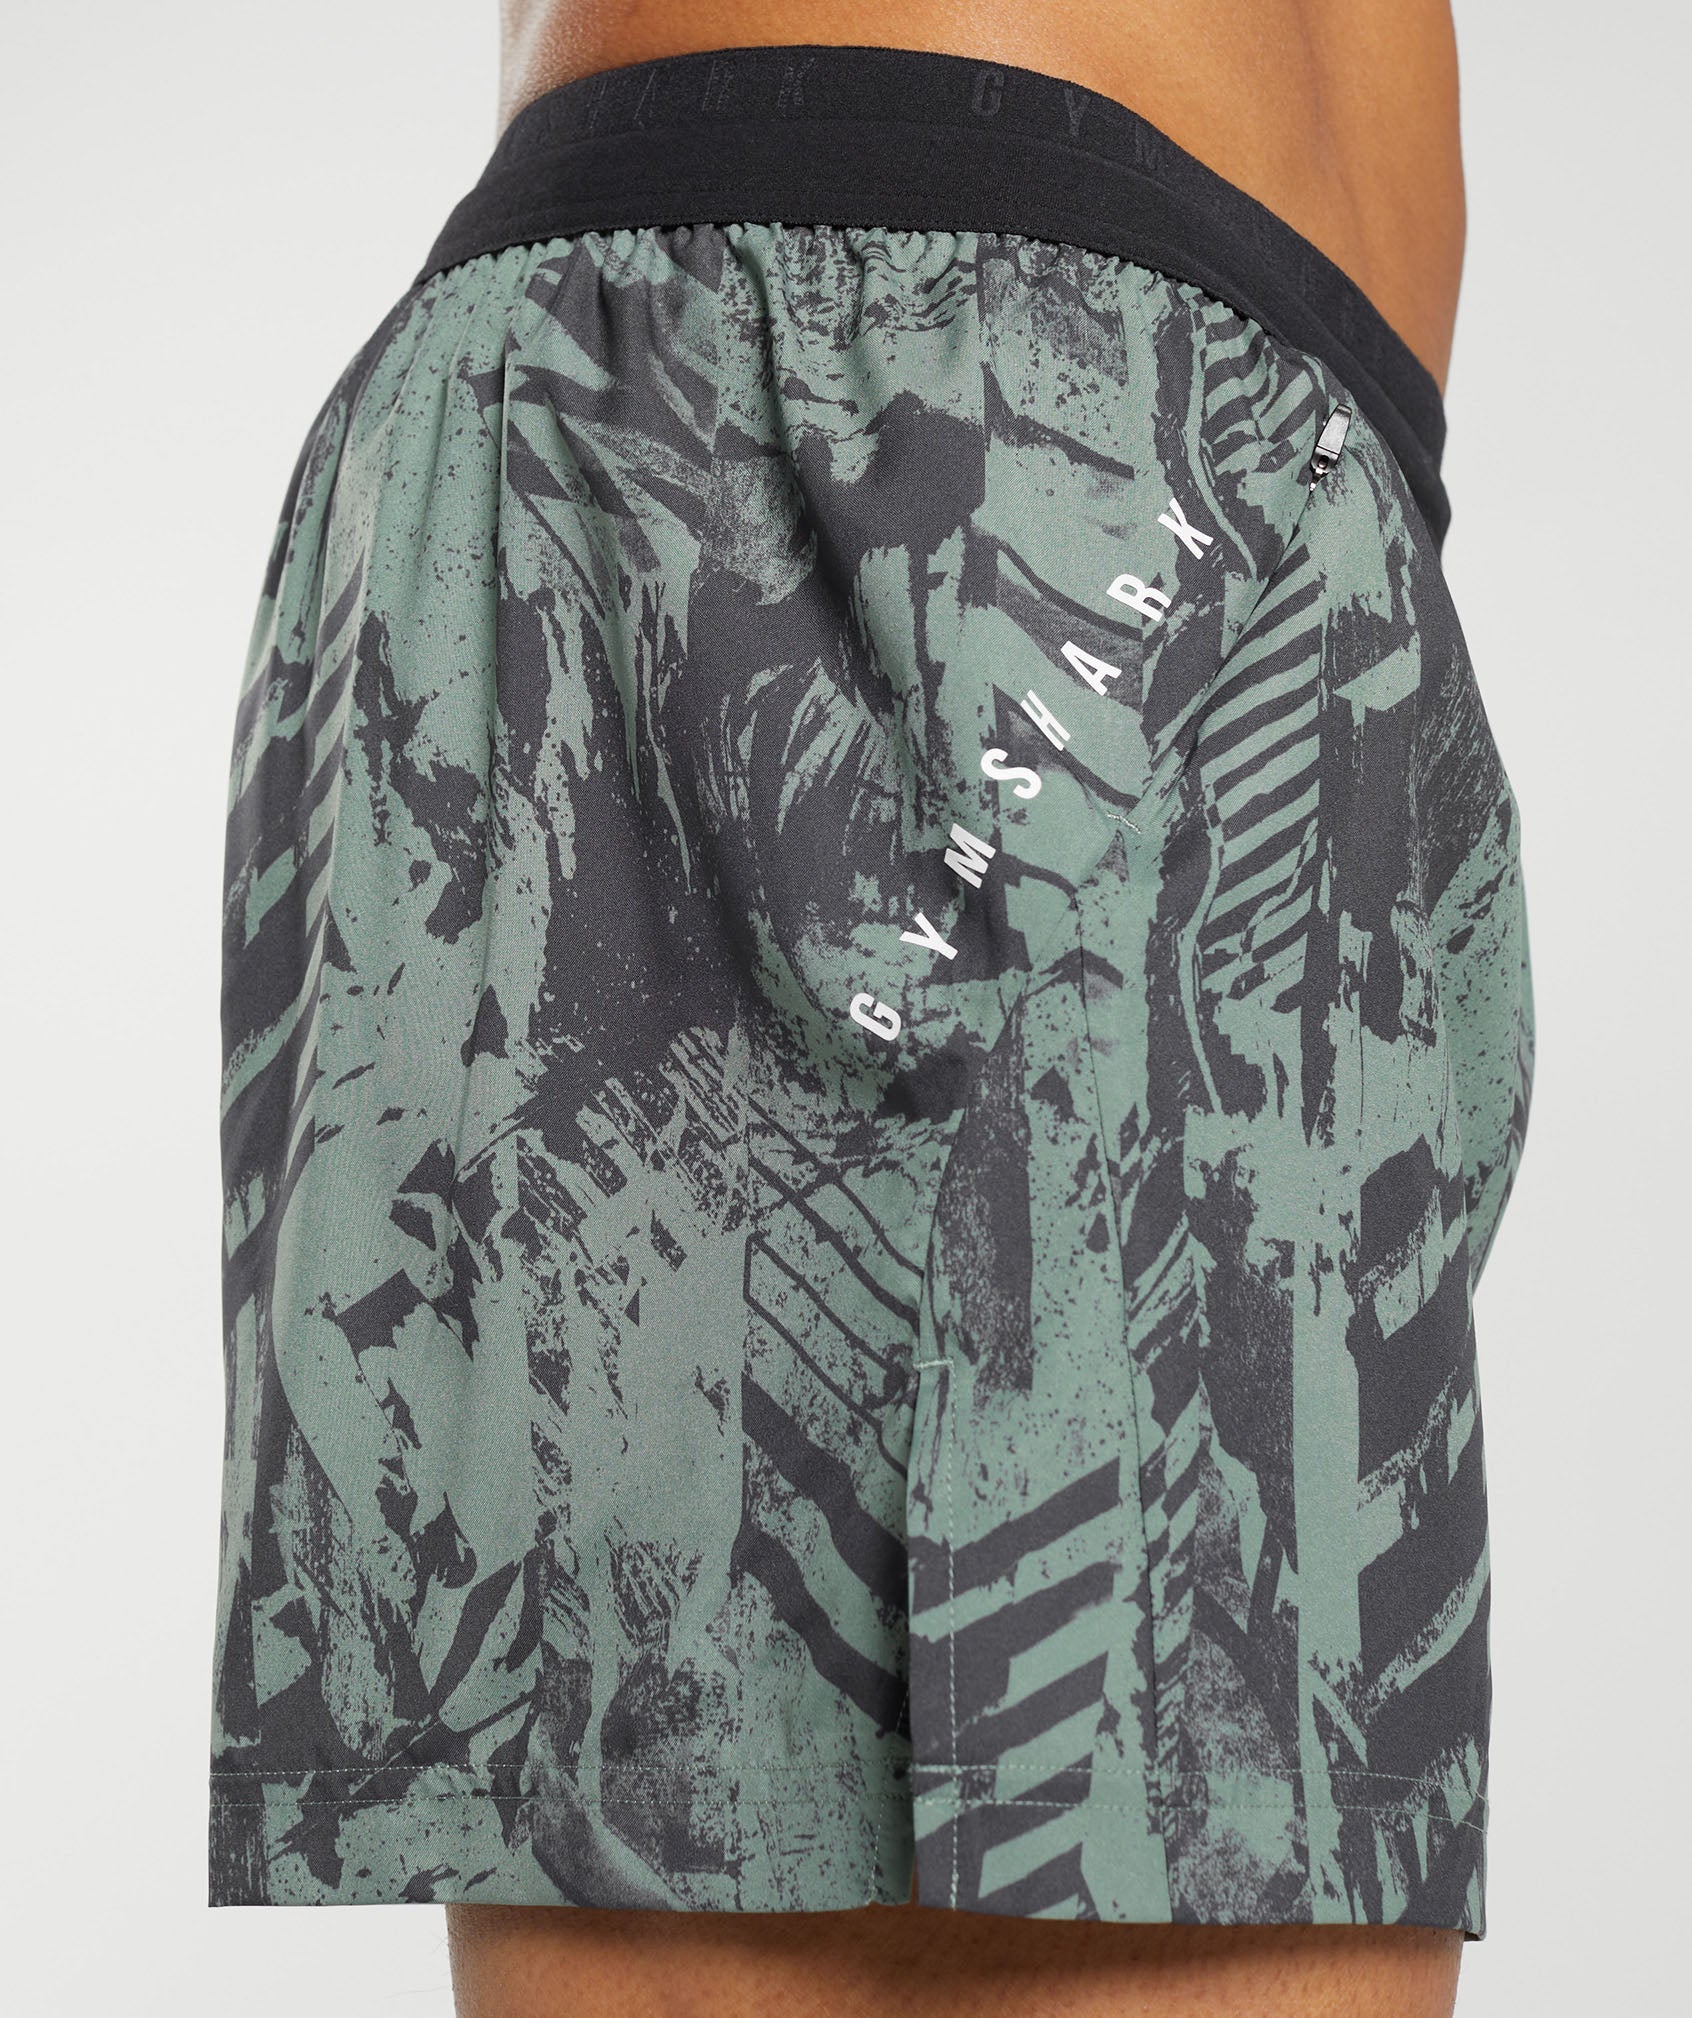 Sport Run 3" Shorts in Willow Green - view 6